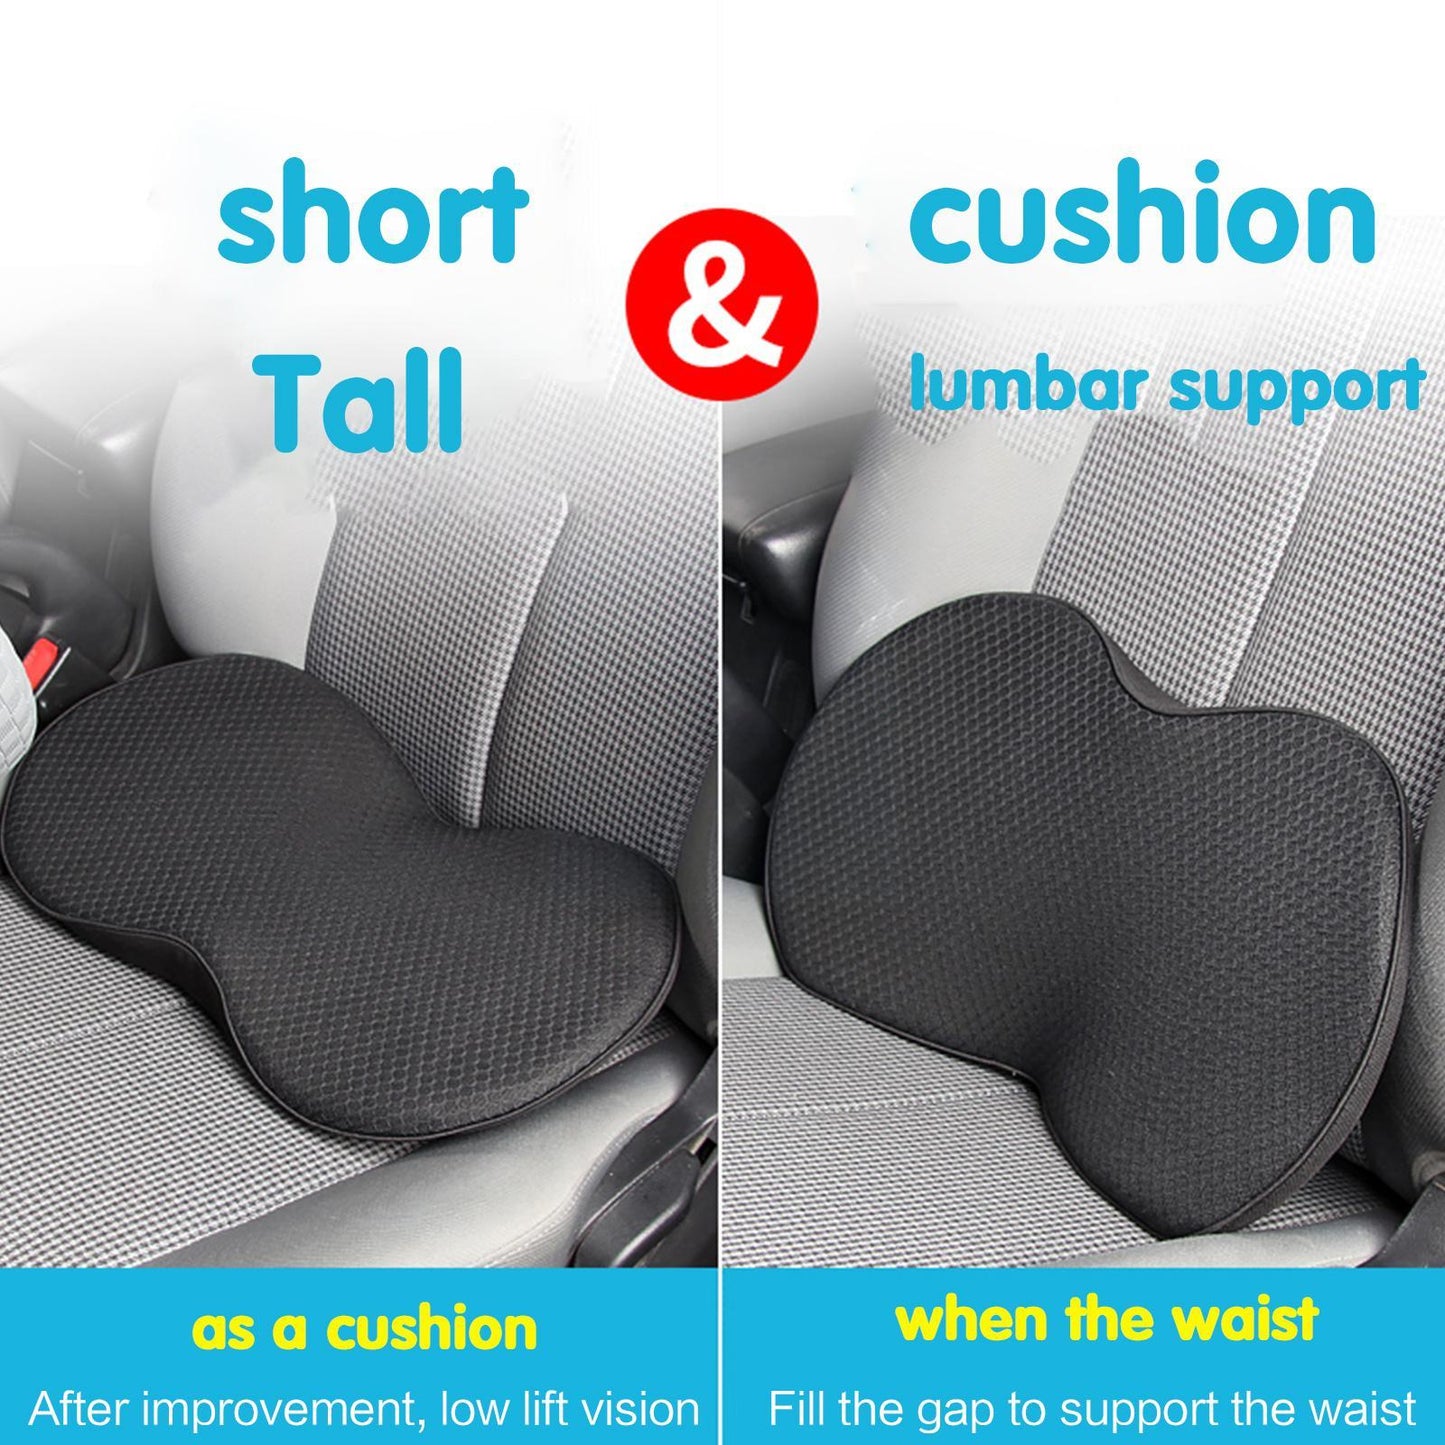 Dreamer Car Heightening Seat Cushion Pad for Car Driver Seat